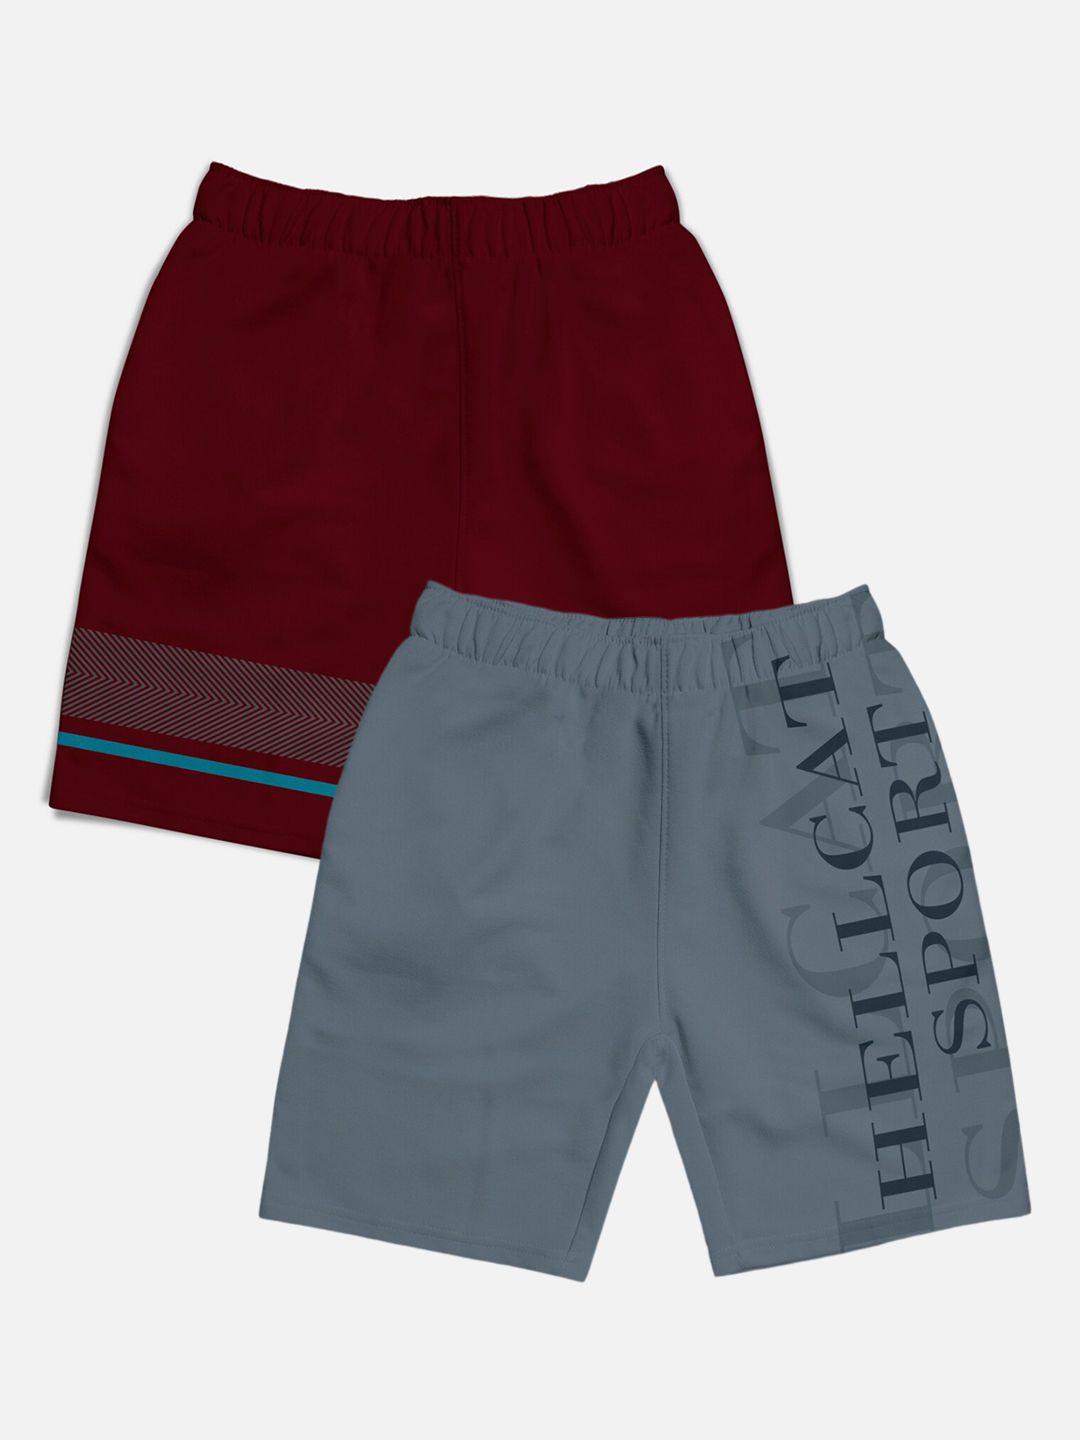 hellcat boys pack of 2 typography printed shorts